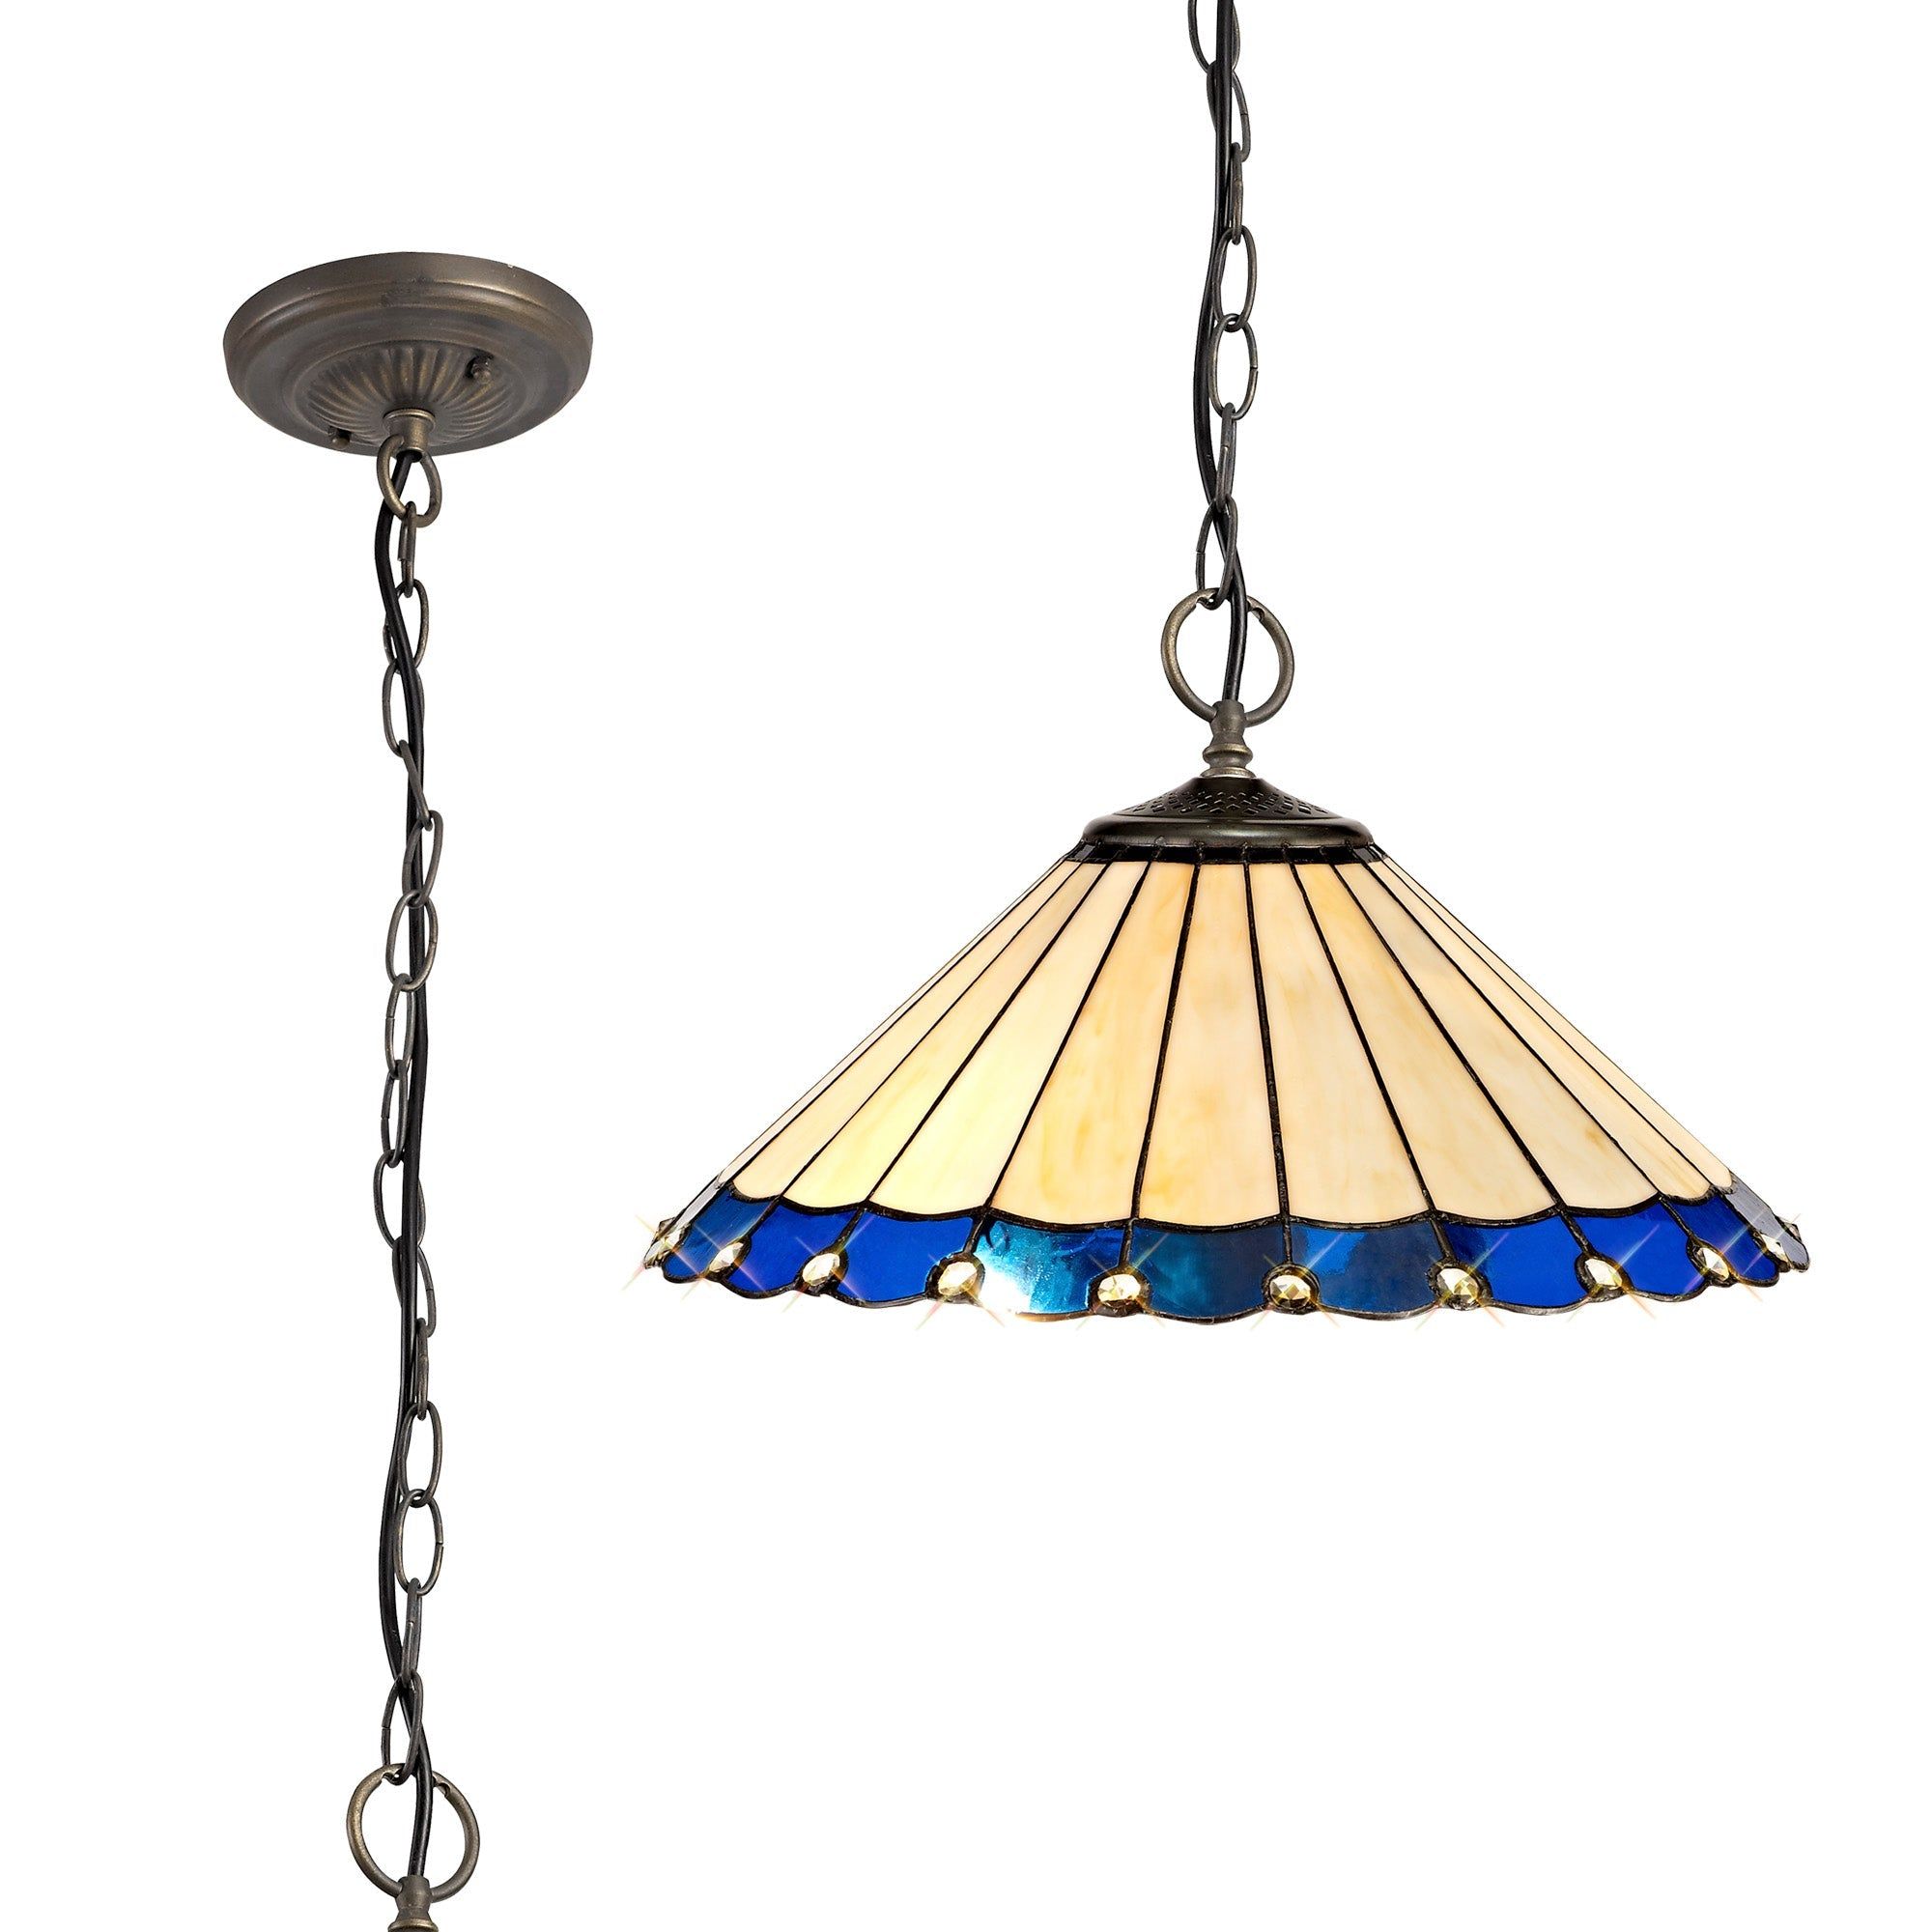 Sheitsr 3 Light Downlighter Pendant E27 With 30/40cm Tiffany Shade